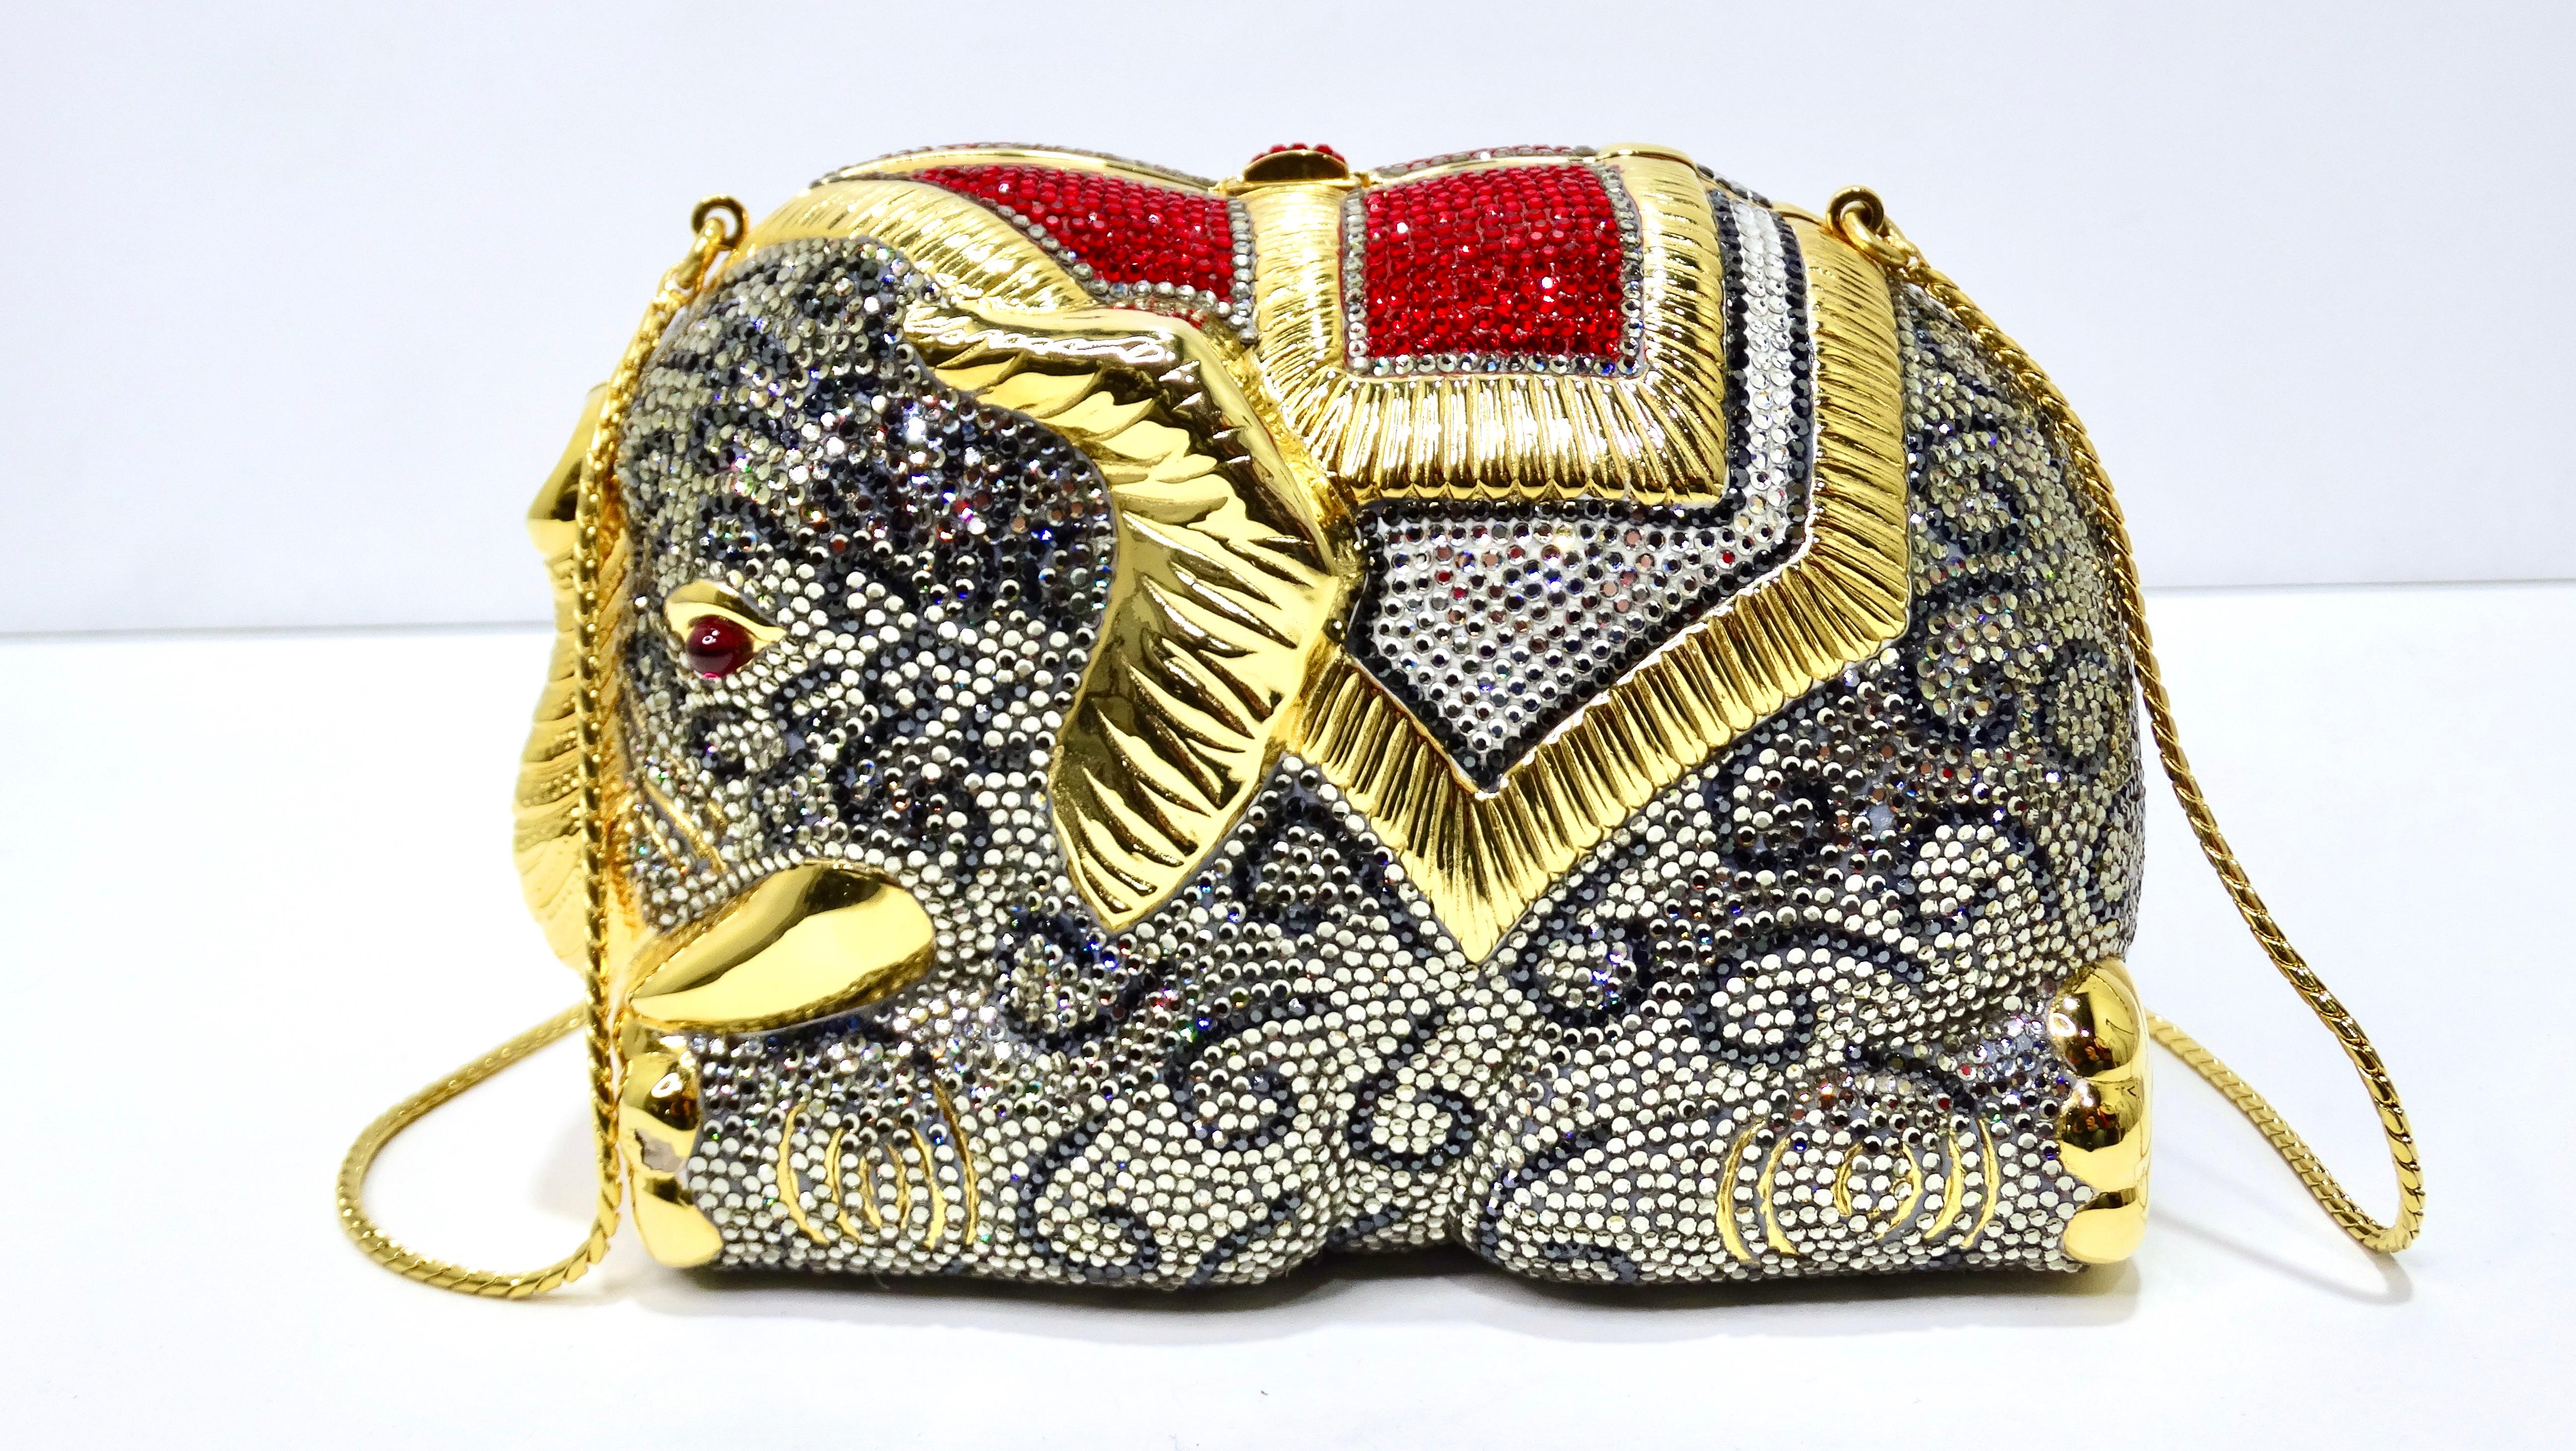 Snag this Judith Leiber minaudiere that is nothing short of exotic and elegant! This elephant minaudiere, inspired by rich Indian culture is featured in full Swarovski Crystal. Judith Leiber creates some of the most beautifully crafted evening bags.